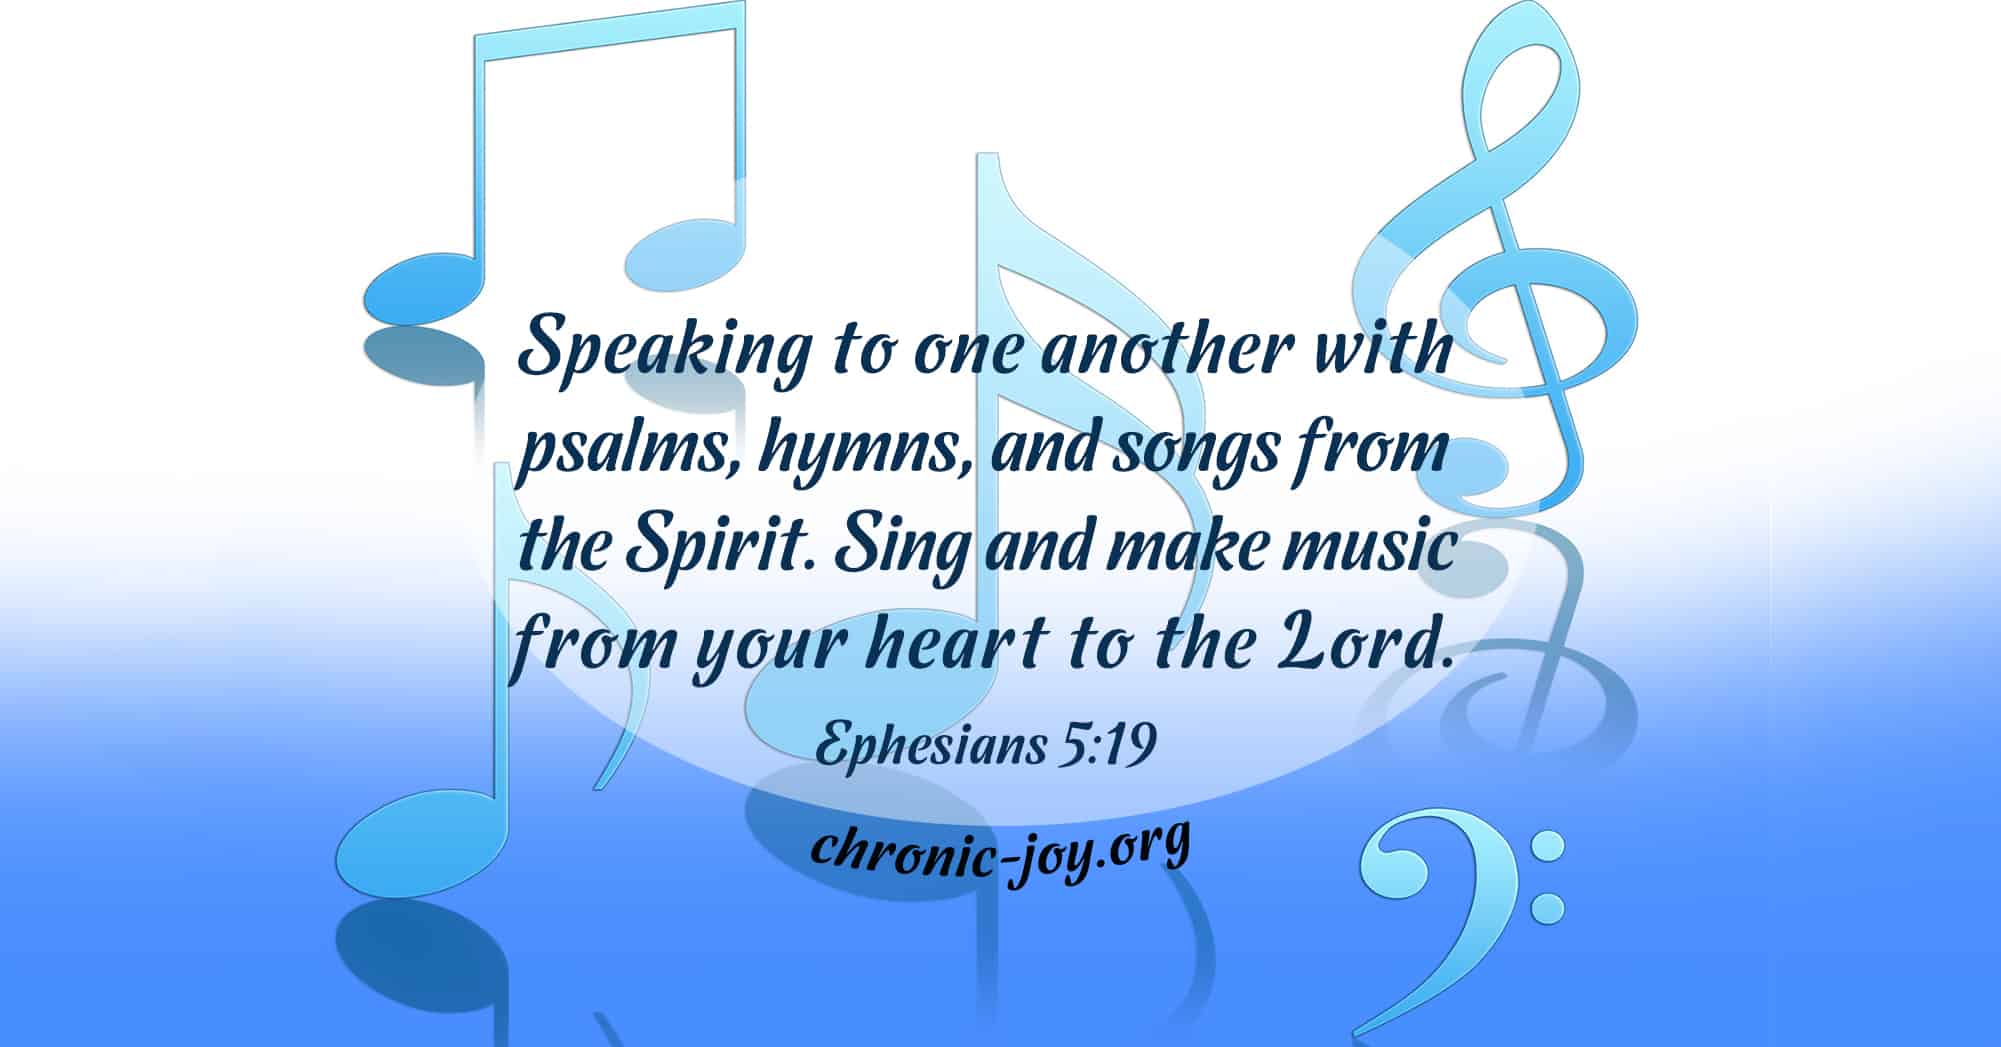 Sing and make music from your heart to the Lord.